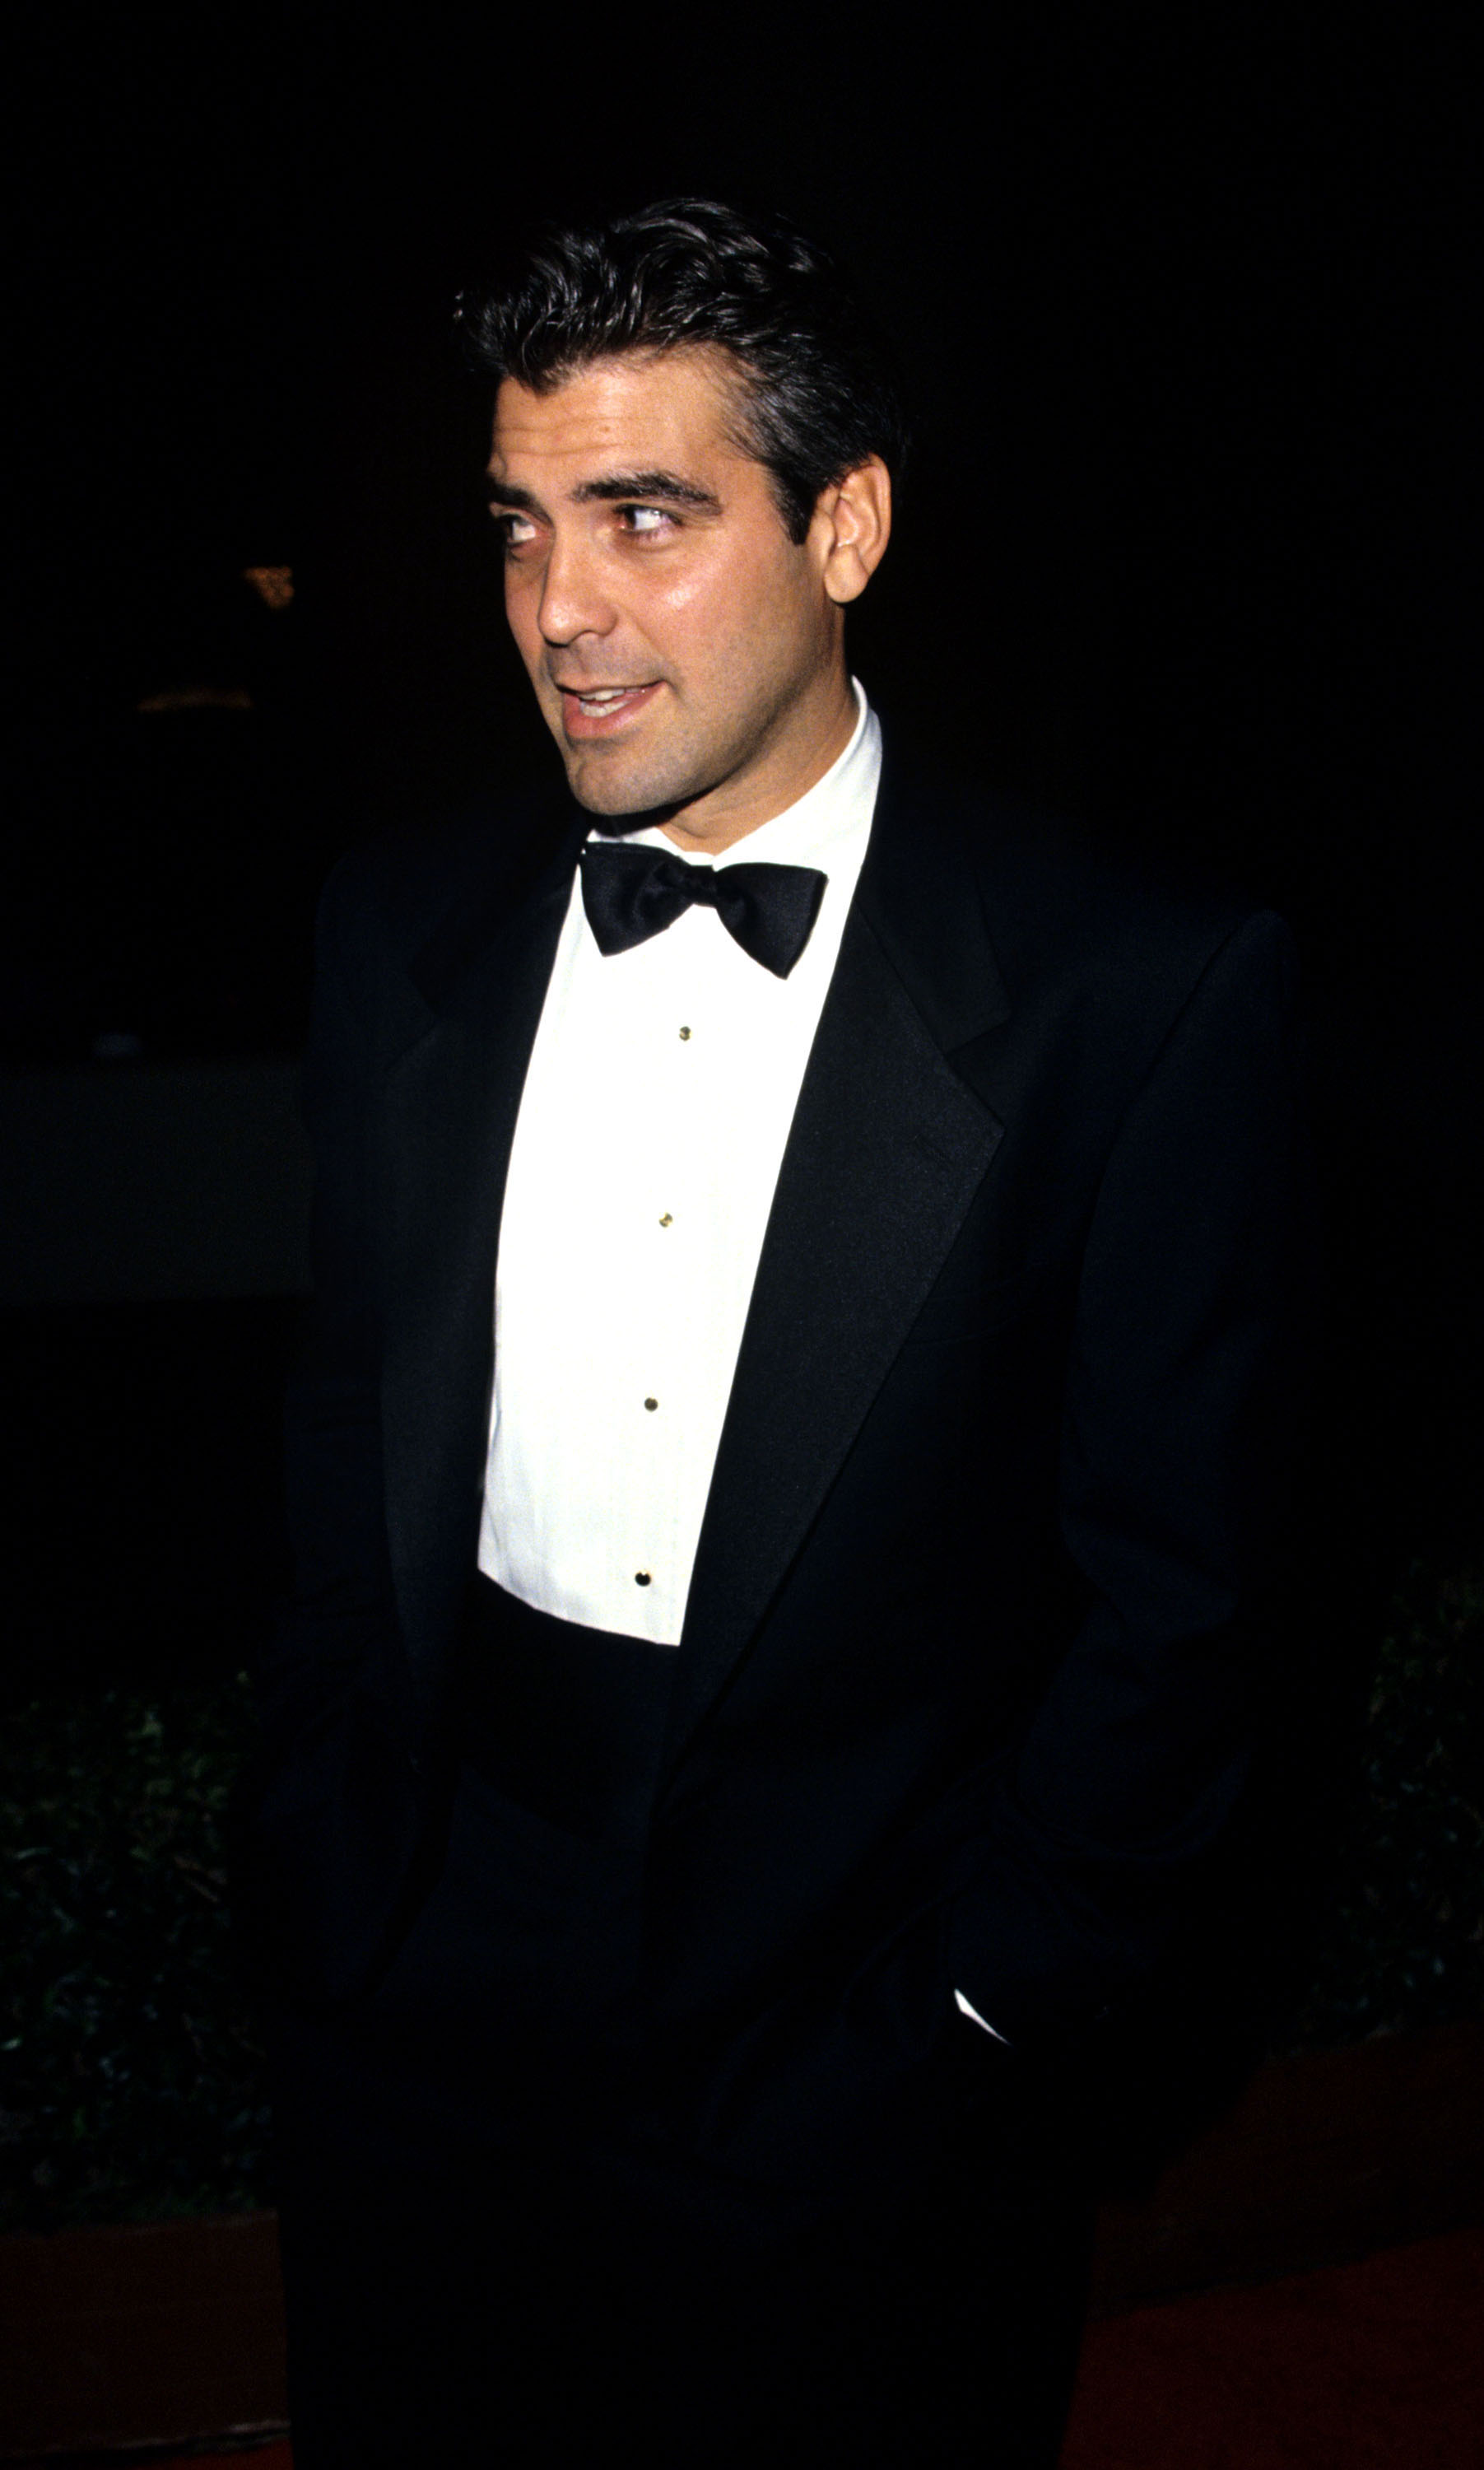 George Clooney at the 52nd Annual Golden Globe Awards in Beverly Hills, California in 1995 | Source: Getty Images